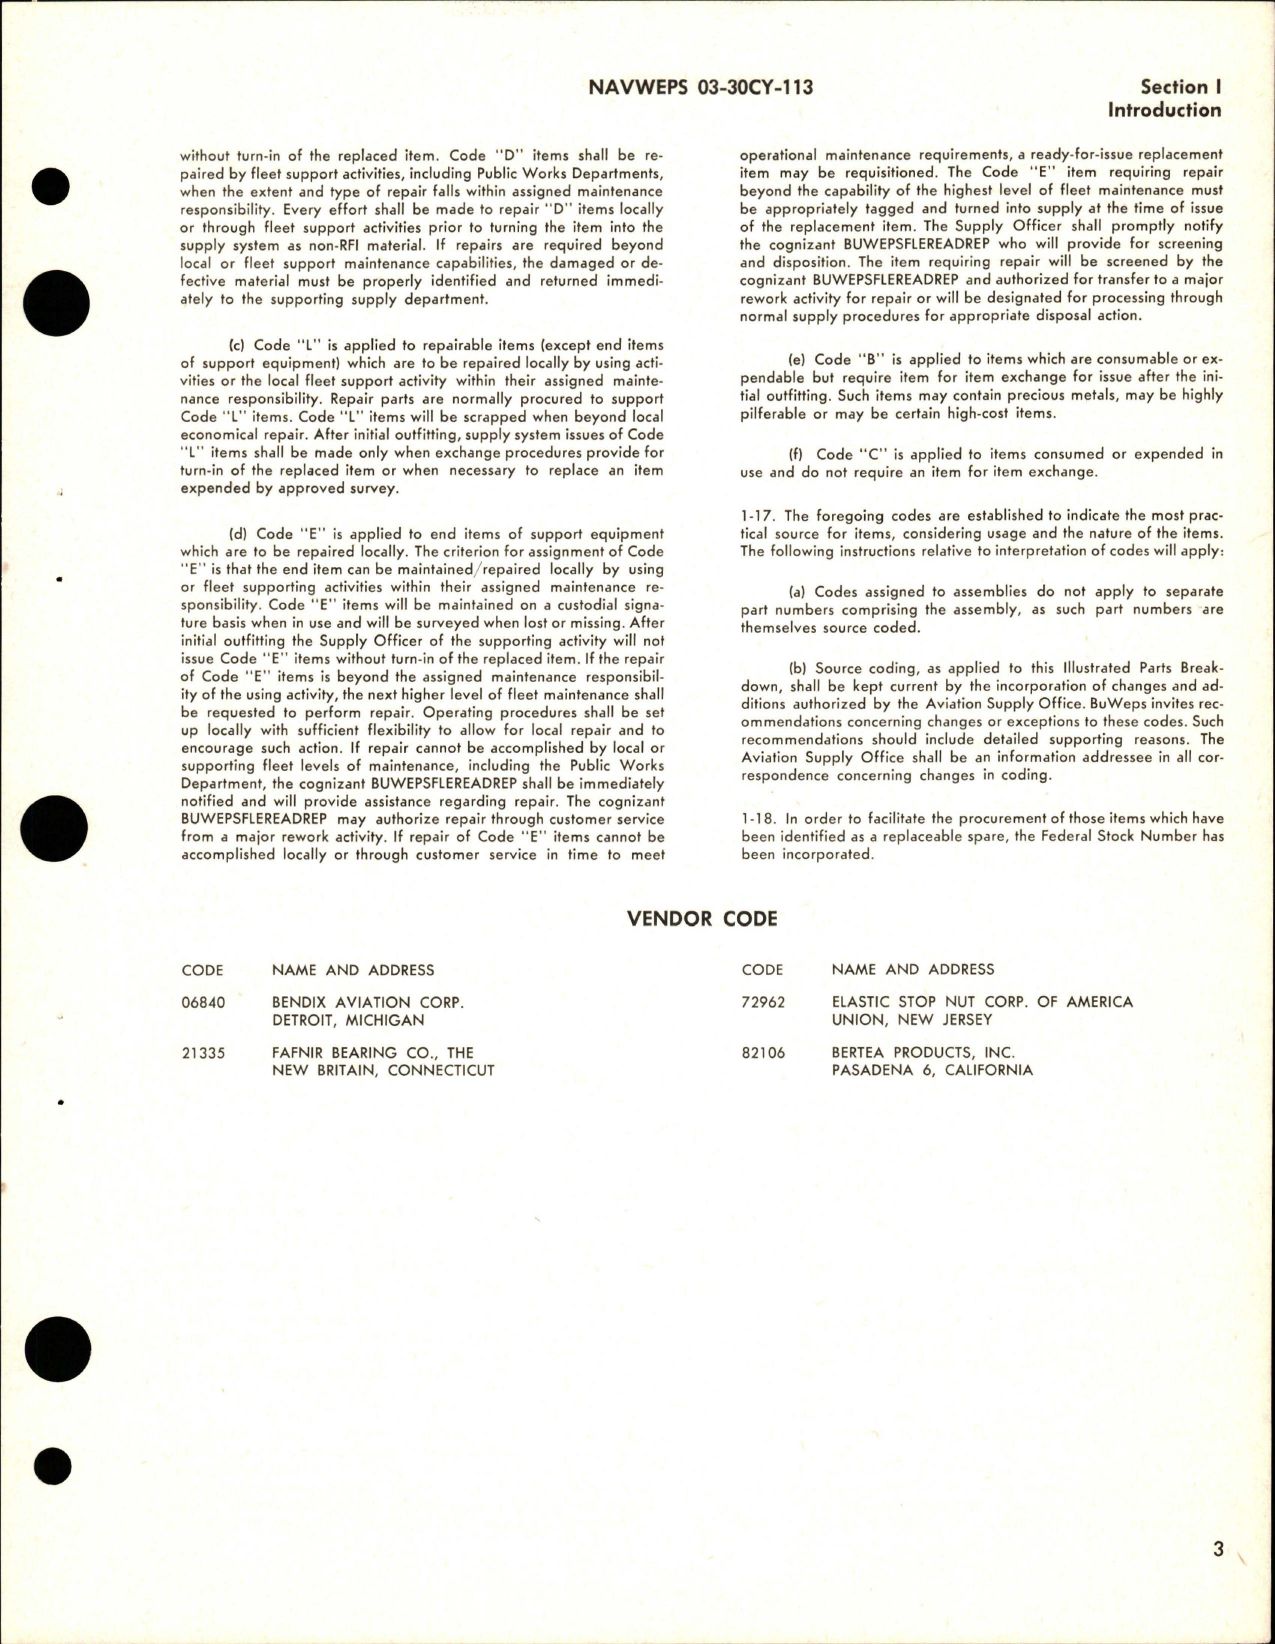 Sample page 5 from AirCorps Library document: Illustrated Parts Breakdown for Elevator Tandem Power Control Mechanism - 5552577 Series